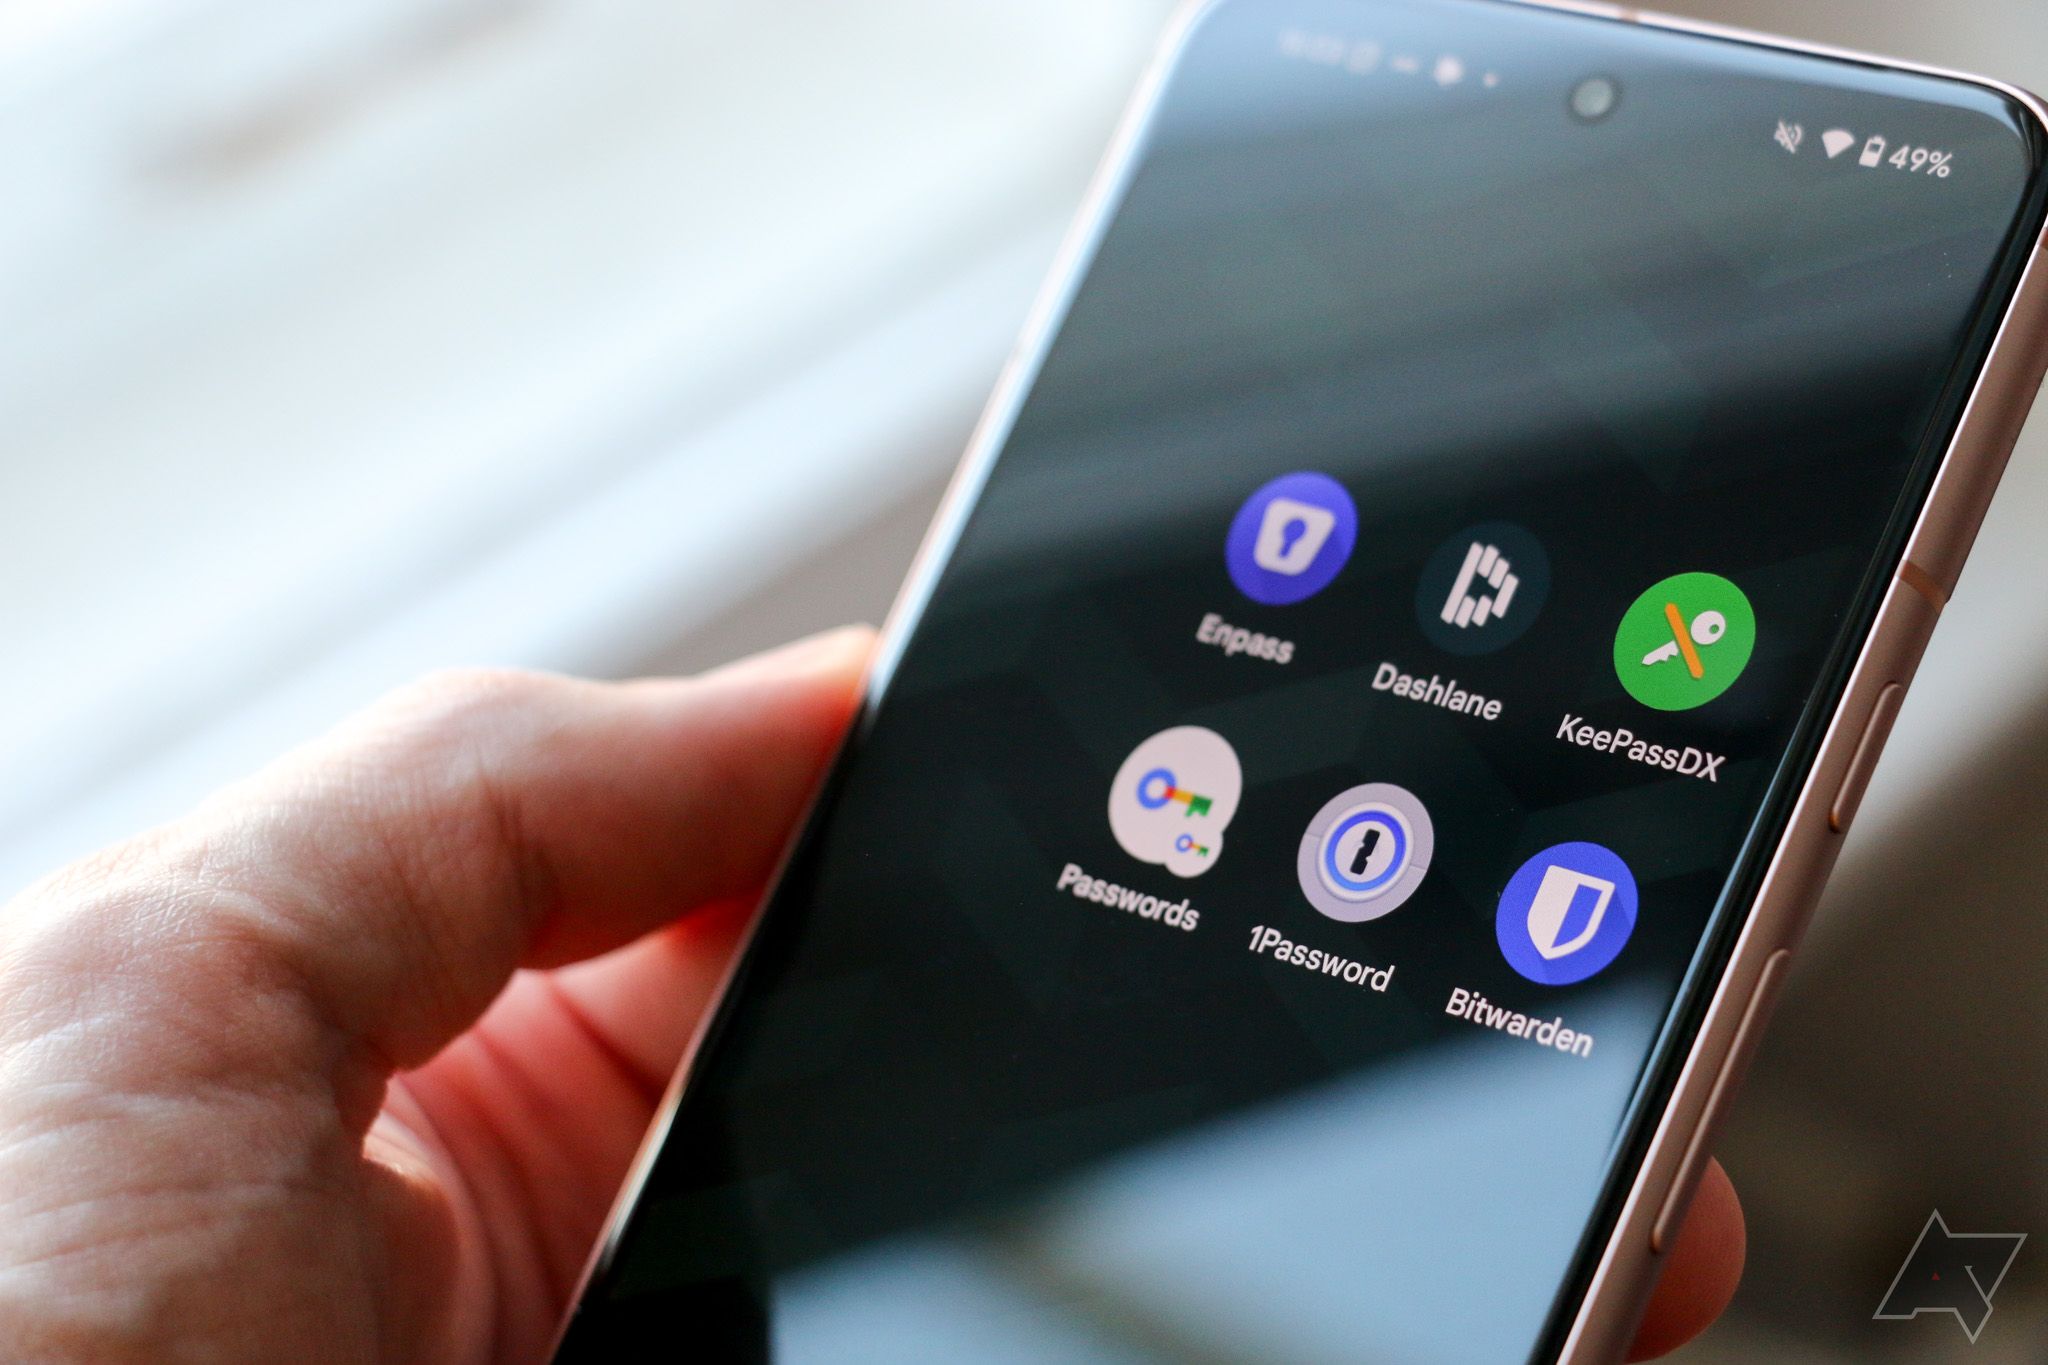 Six different password managers arranged artfully on an Android phone's home screen